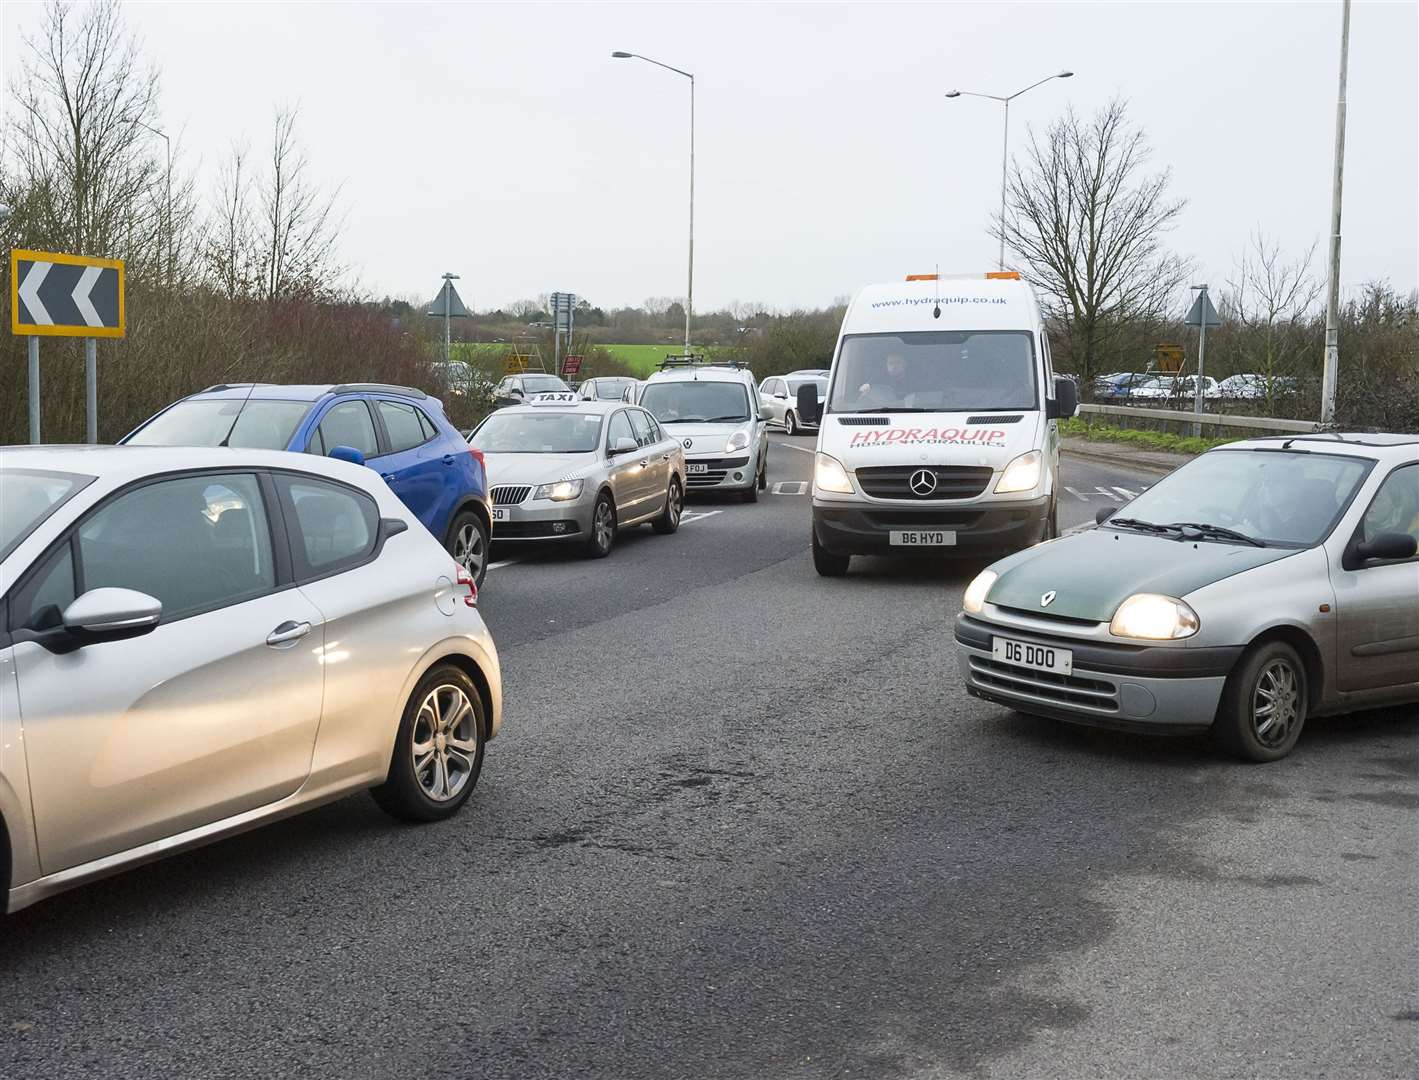 Brenley Corner is one of Kent's most congested junctions